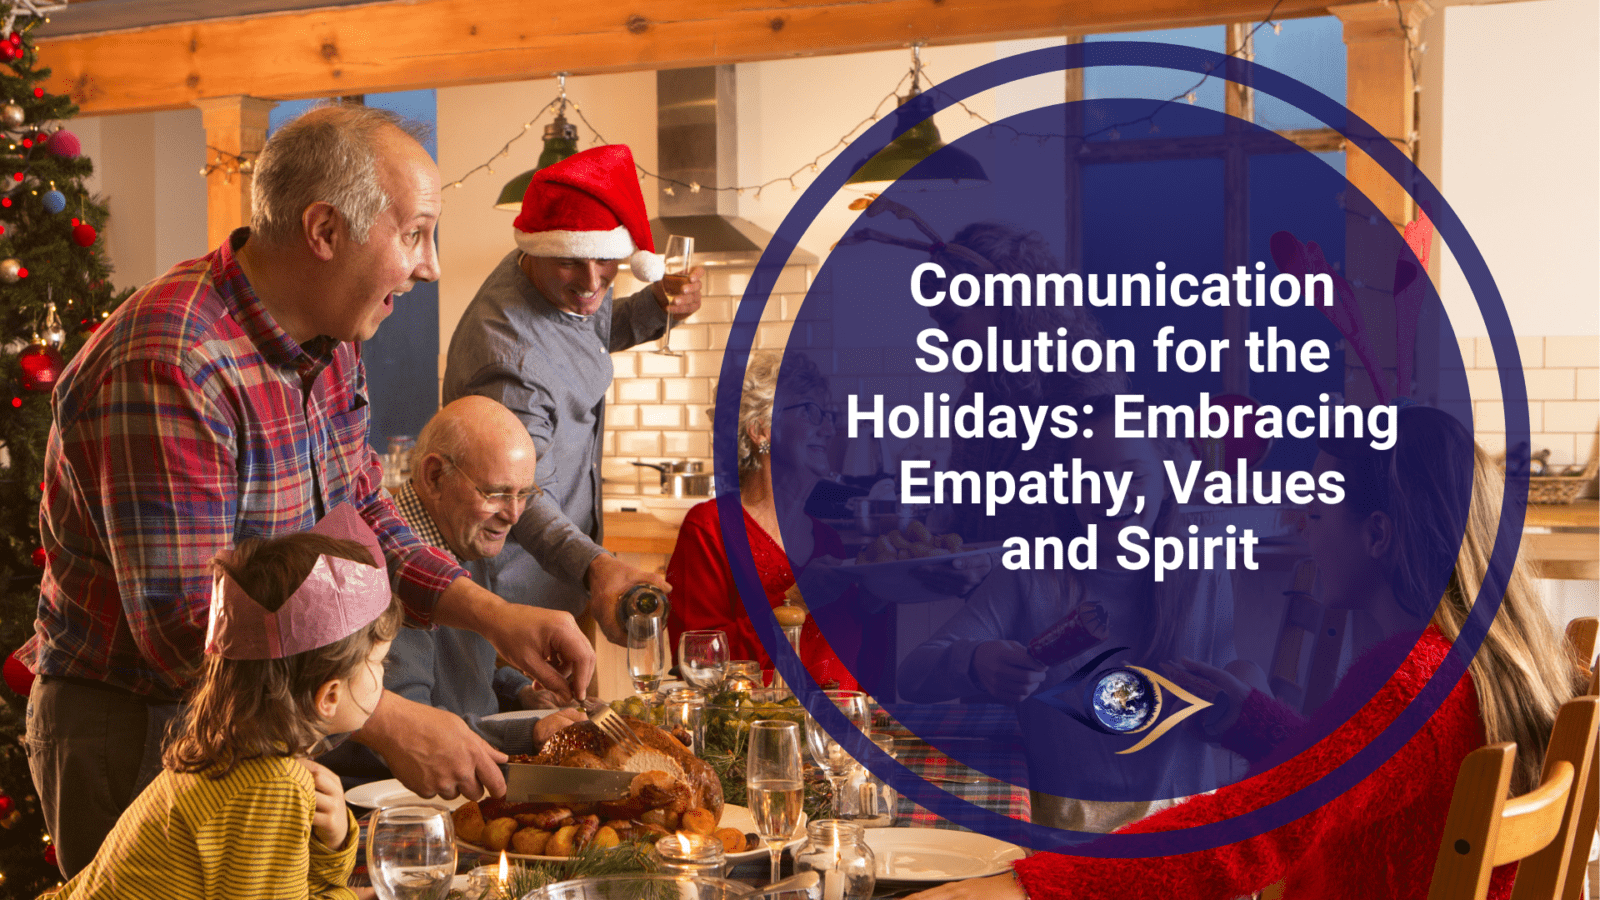 Communication Solution for the Holidays: Embracing Empathy, Values, and Spirit